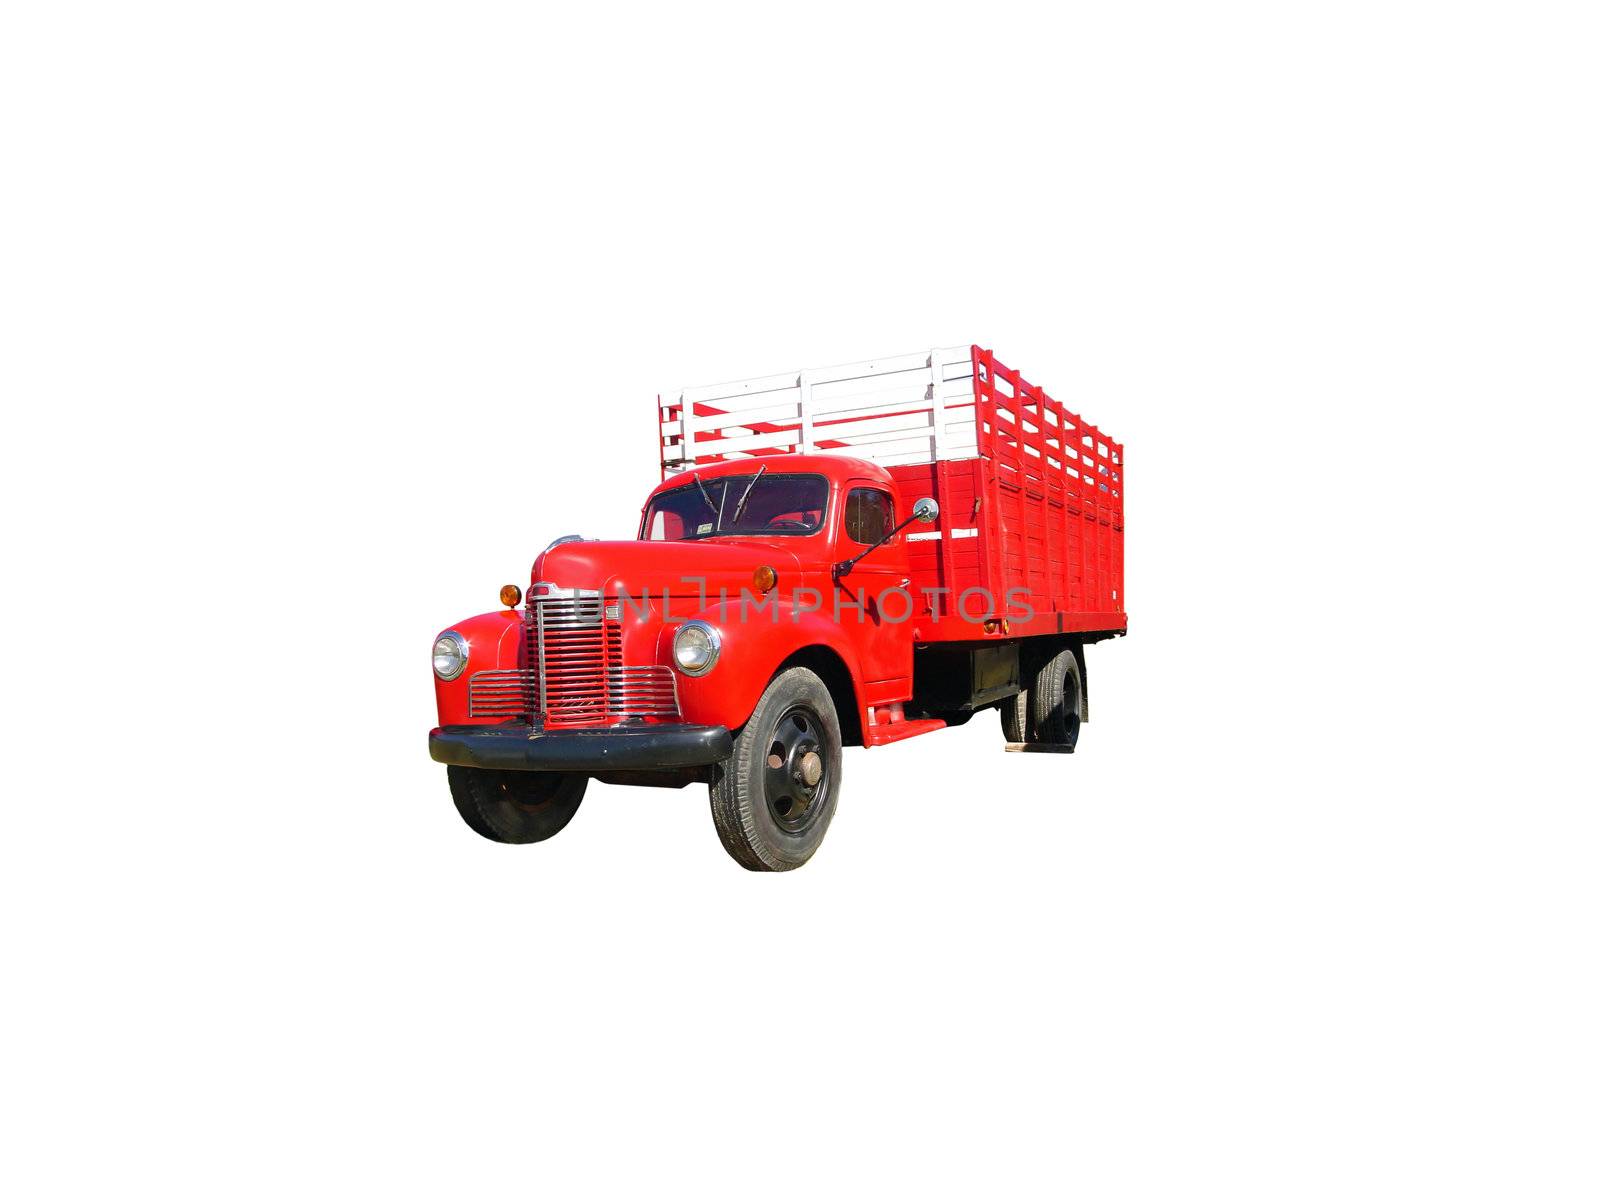 Stake Truck by dtouch1